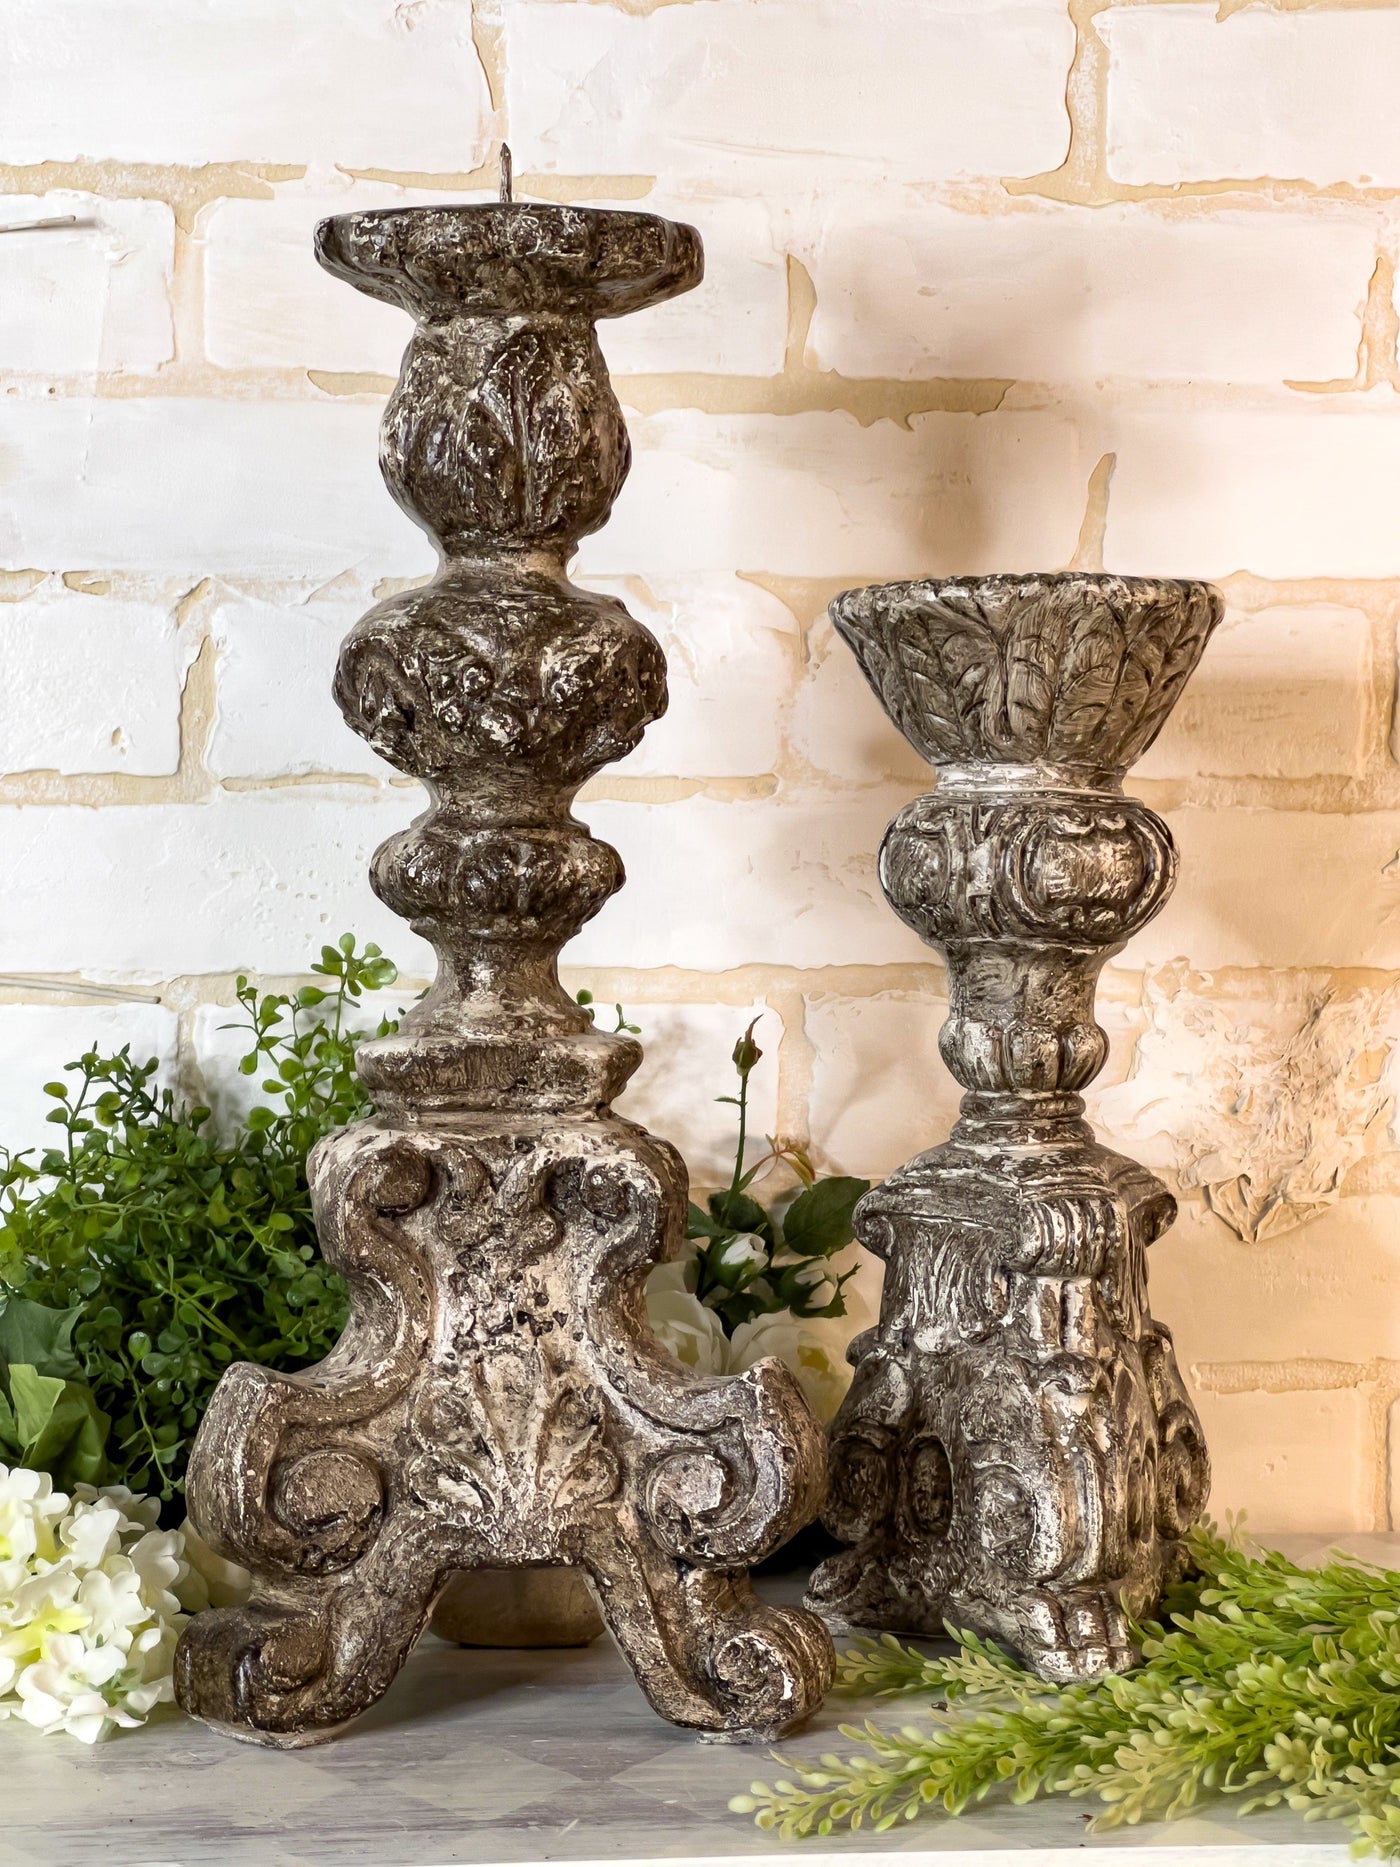 Chunky & Antiqued Candleholders (set of 2) Revive In Style Vintage Furniture Painted Refinished Redesign Beautiful One of a Kind Artistic Antique Unique Home Decor Interior Design French Country Shabby Chic Cottage Farmhouse Grandmillenial Coastal Chalk Paint Metallic Glam Eclectic Quality Dovetailed Rustic Furniture Painter Pinterest Bedroom Living Room Entryway Kitchen Home Trends House Styles Decorating ideas